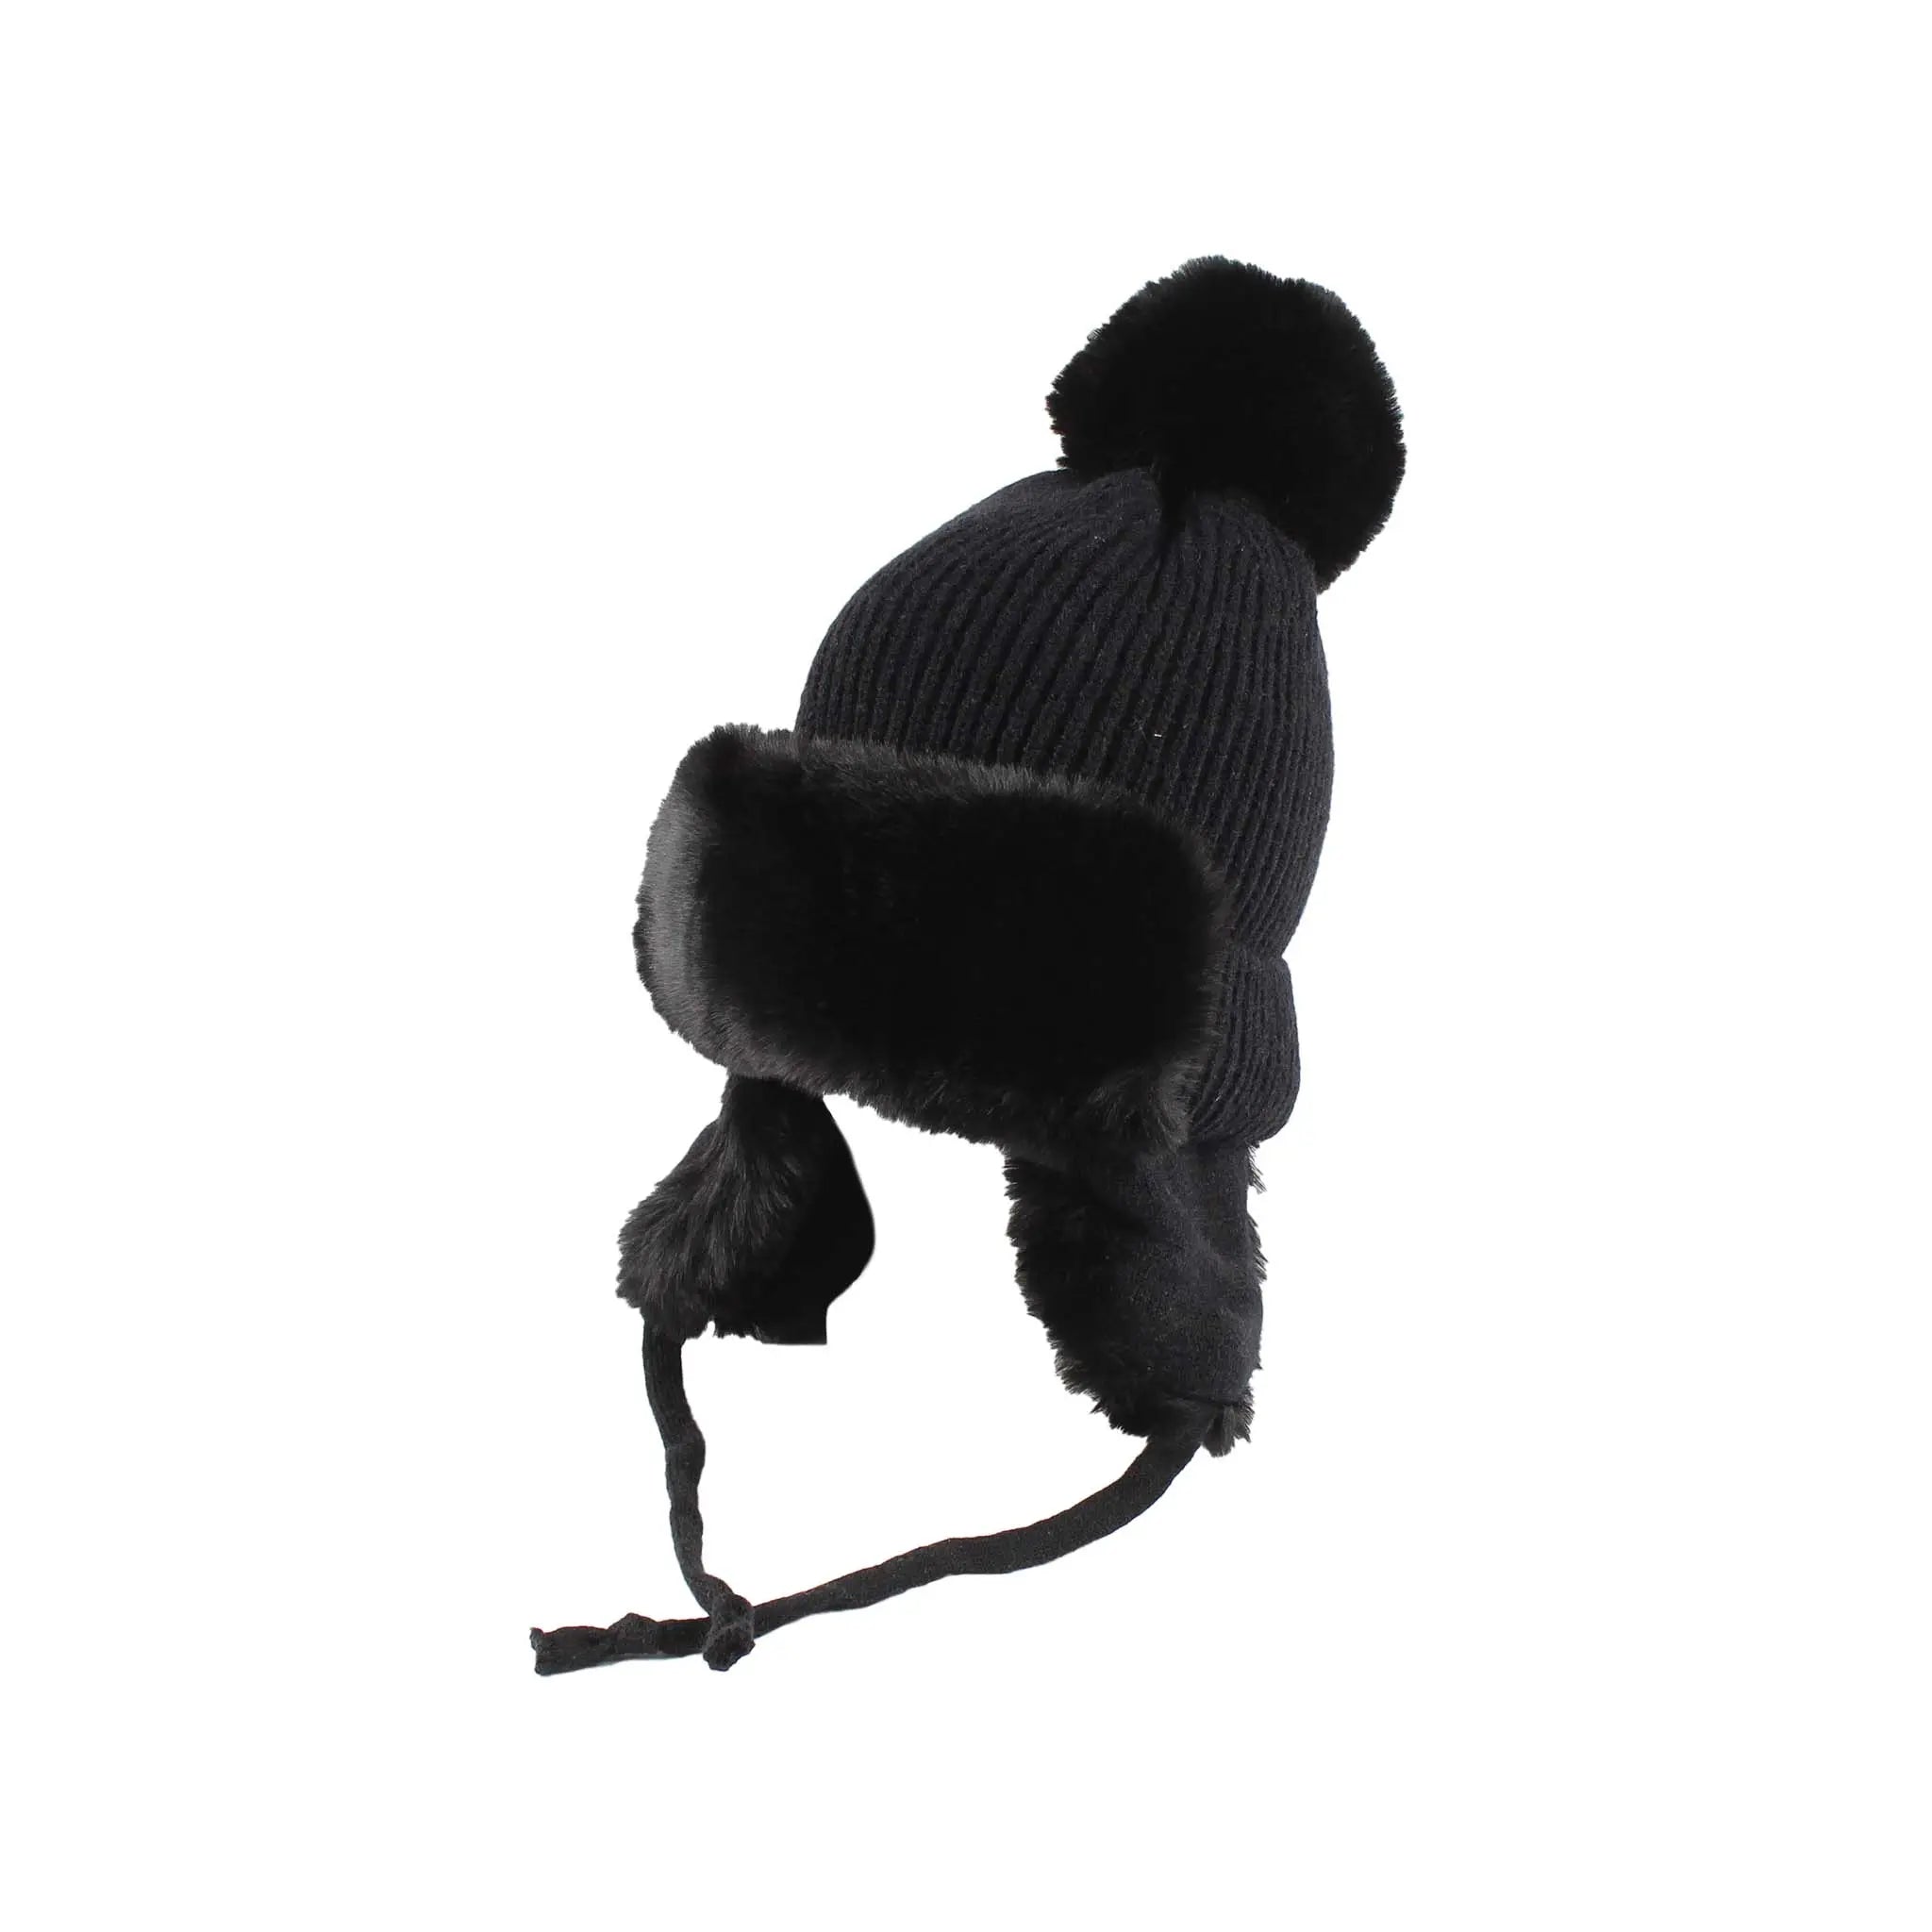 black chunky knit cuffed beanie hat lined with black faux fur lining and pom-pom topper as well as a trapper style front headband and ear flaps